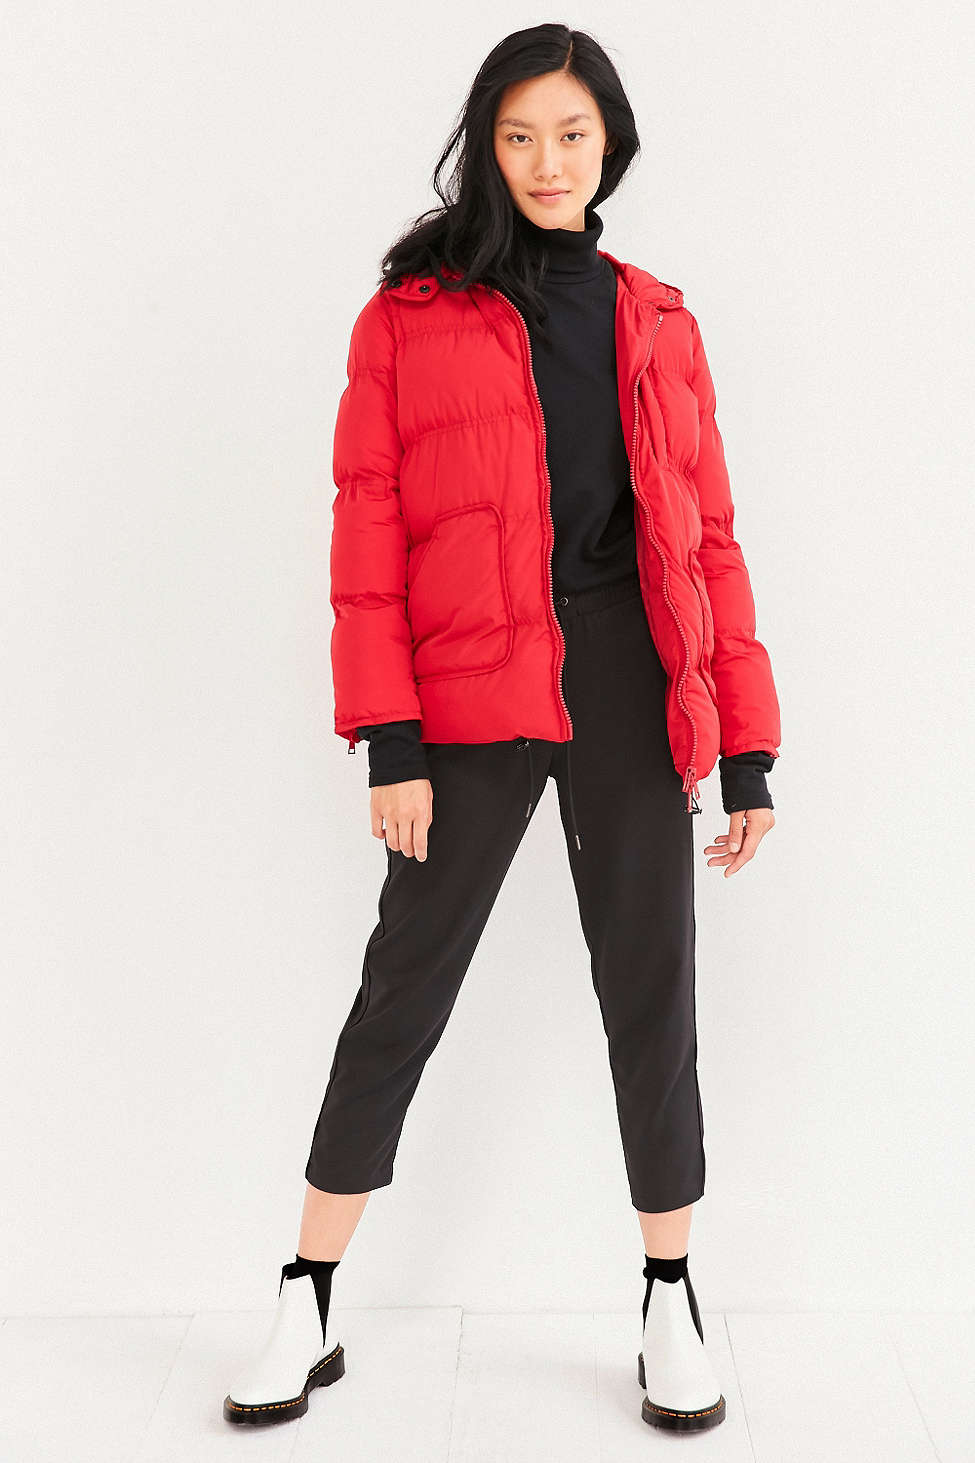 White Sweater, Red Puffer Jacket, Leggings, Black Sneakers, and